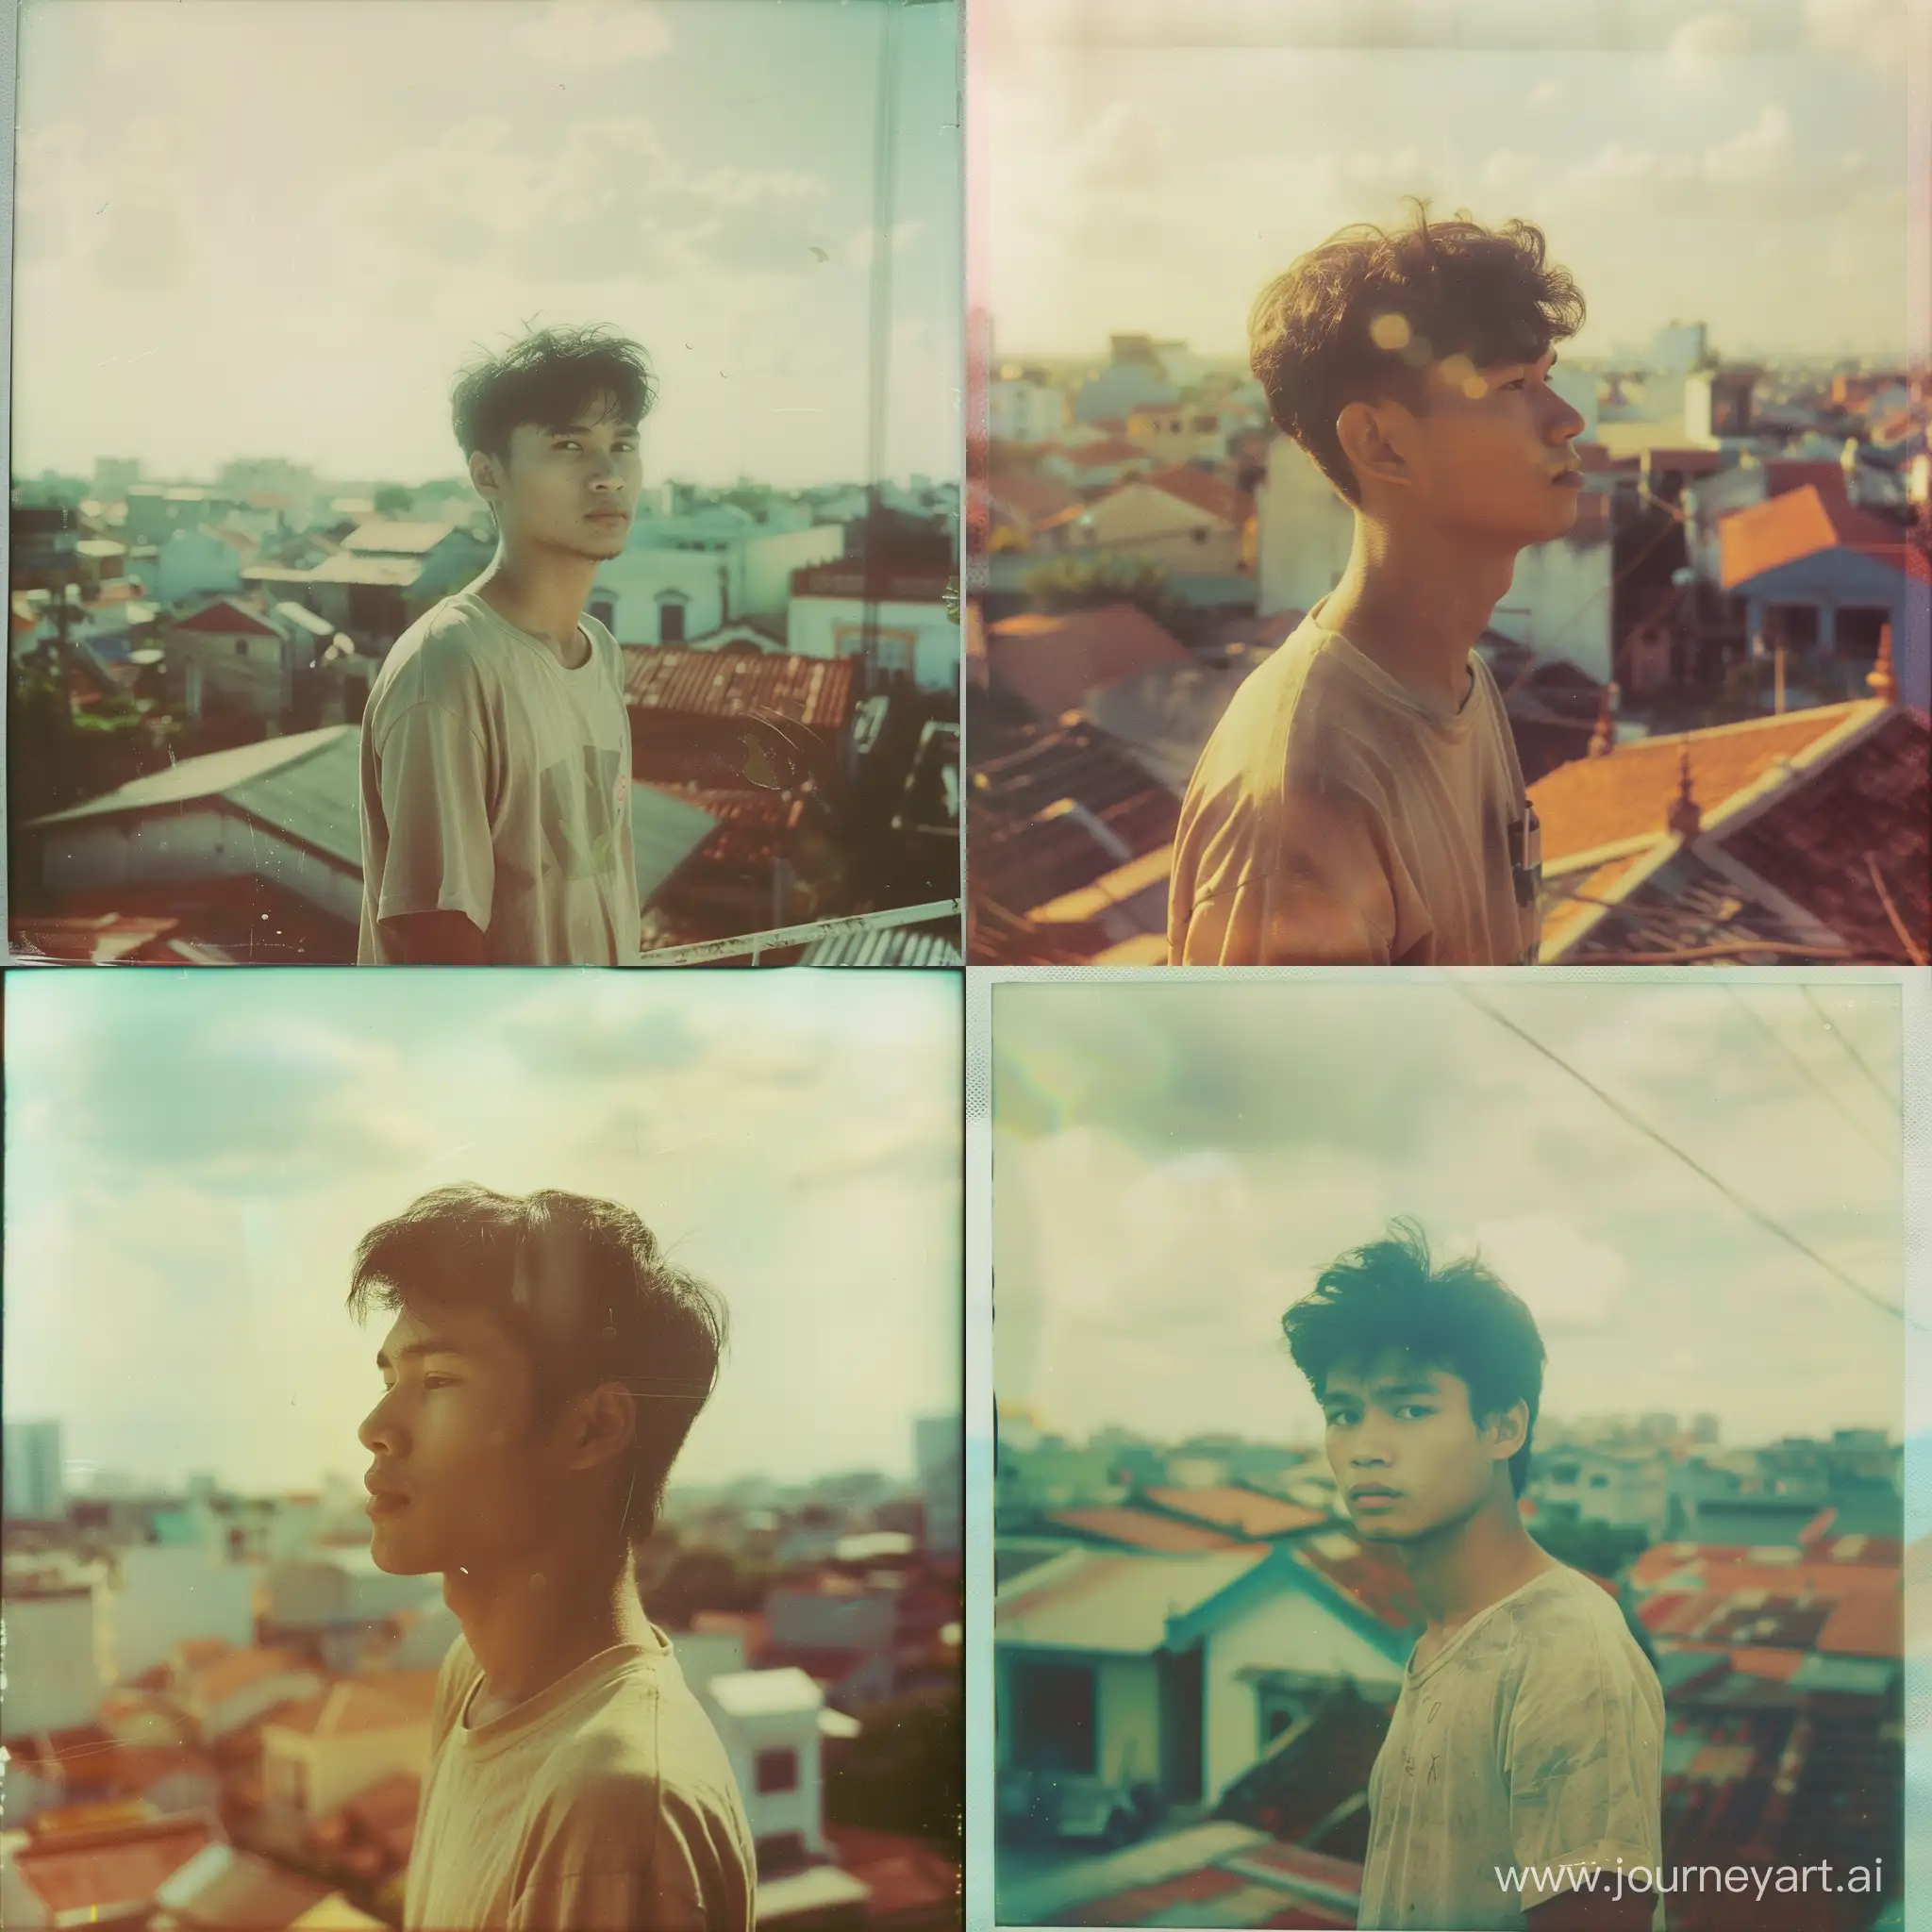 vintage polaroid/film photo of a  young man against little  town at sunny day in  Ho Chi Minh city 1992, polaroid 600 film, depth of field, soft and dreamy tones.

